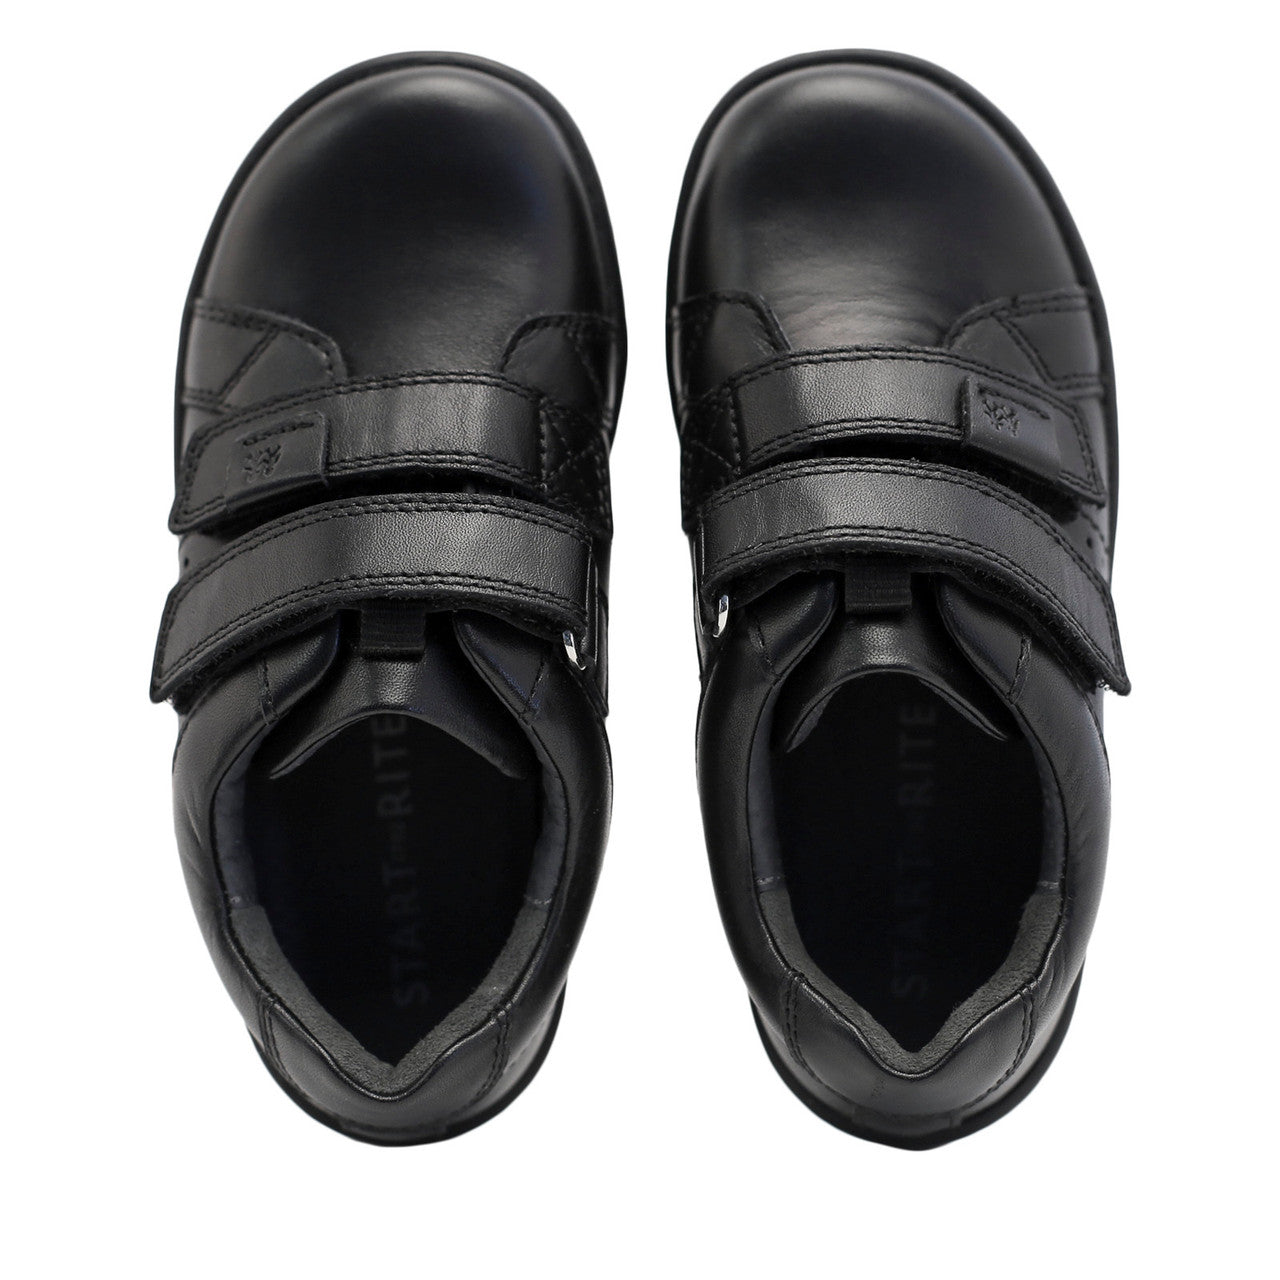 A pair of boys casual school shoes by Start Rite, style Explore, in black leather with double velcro fastening. Above view.